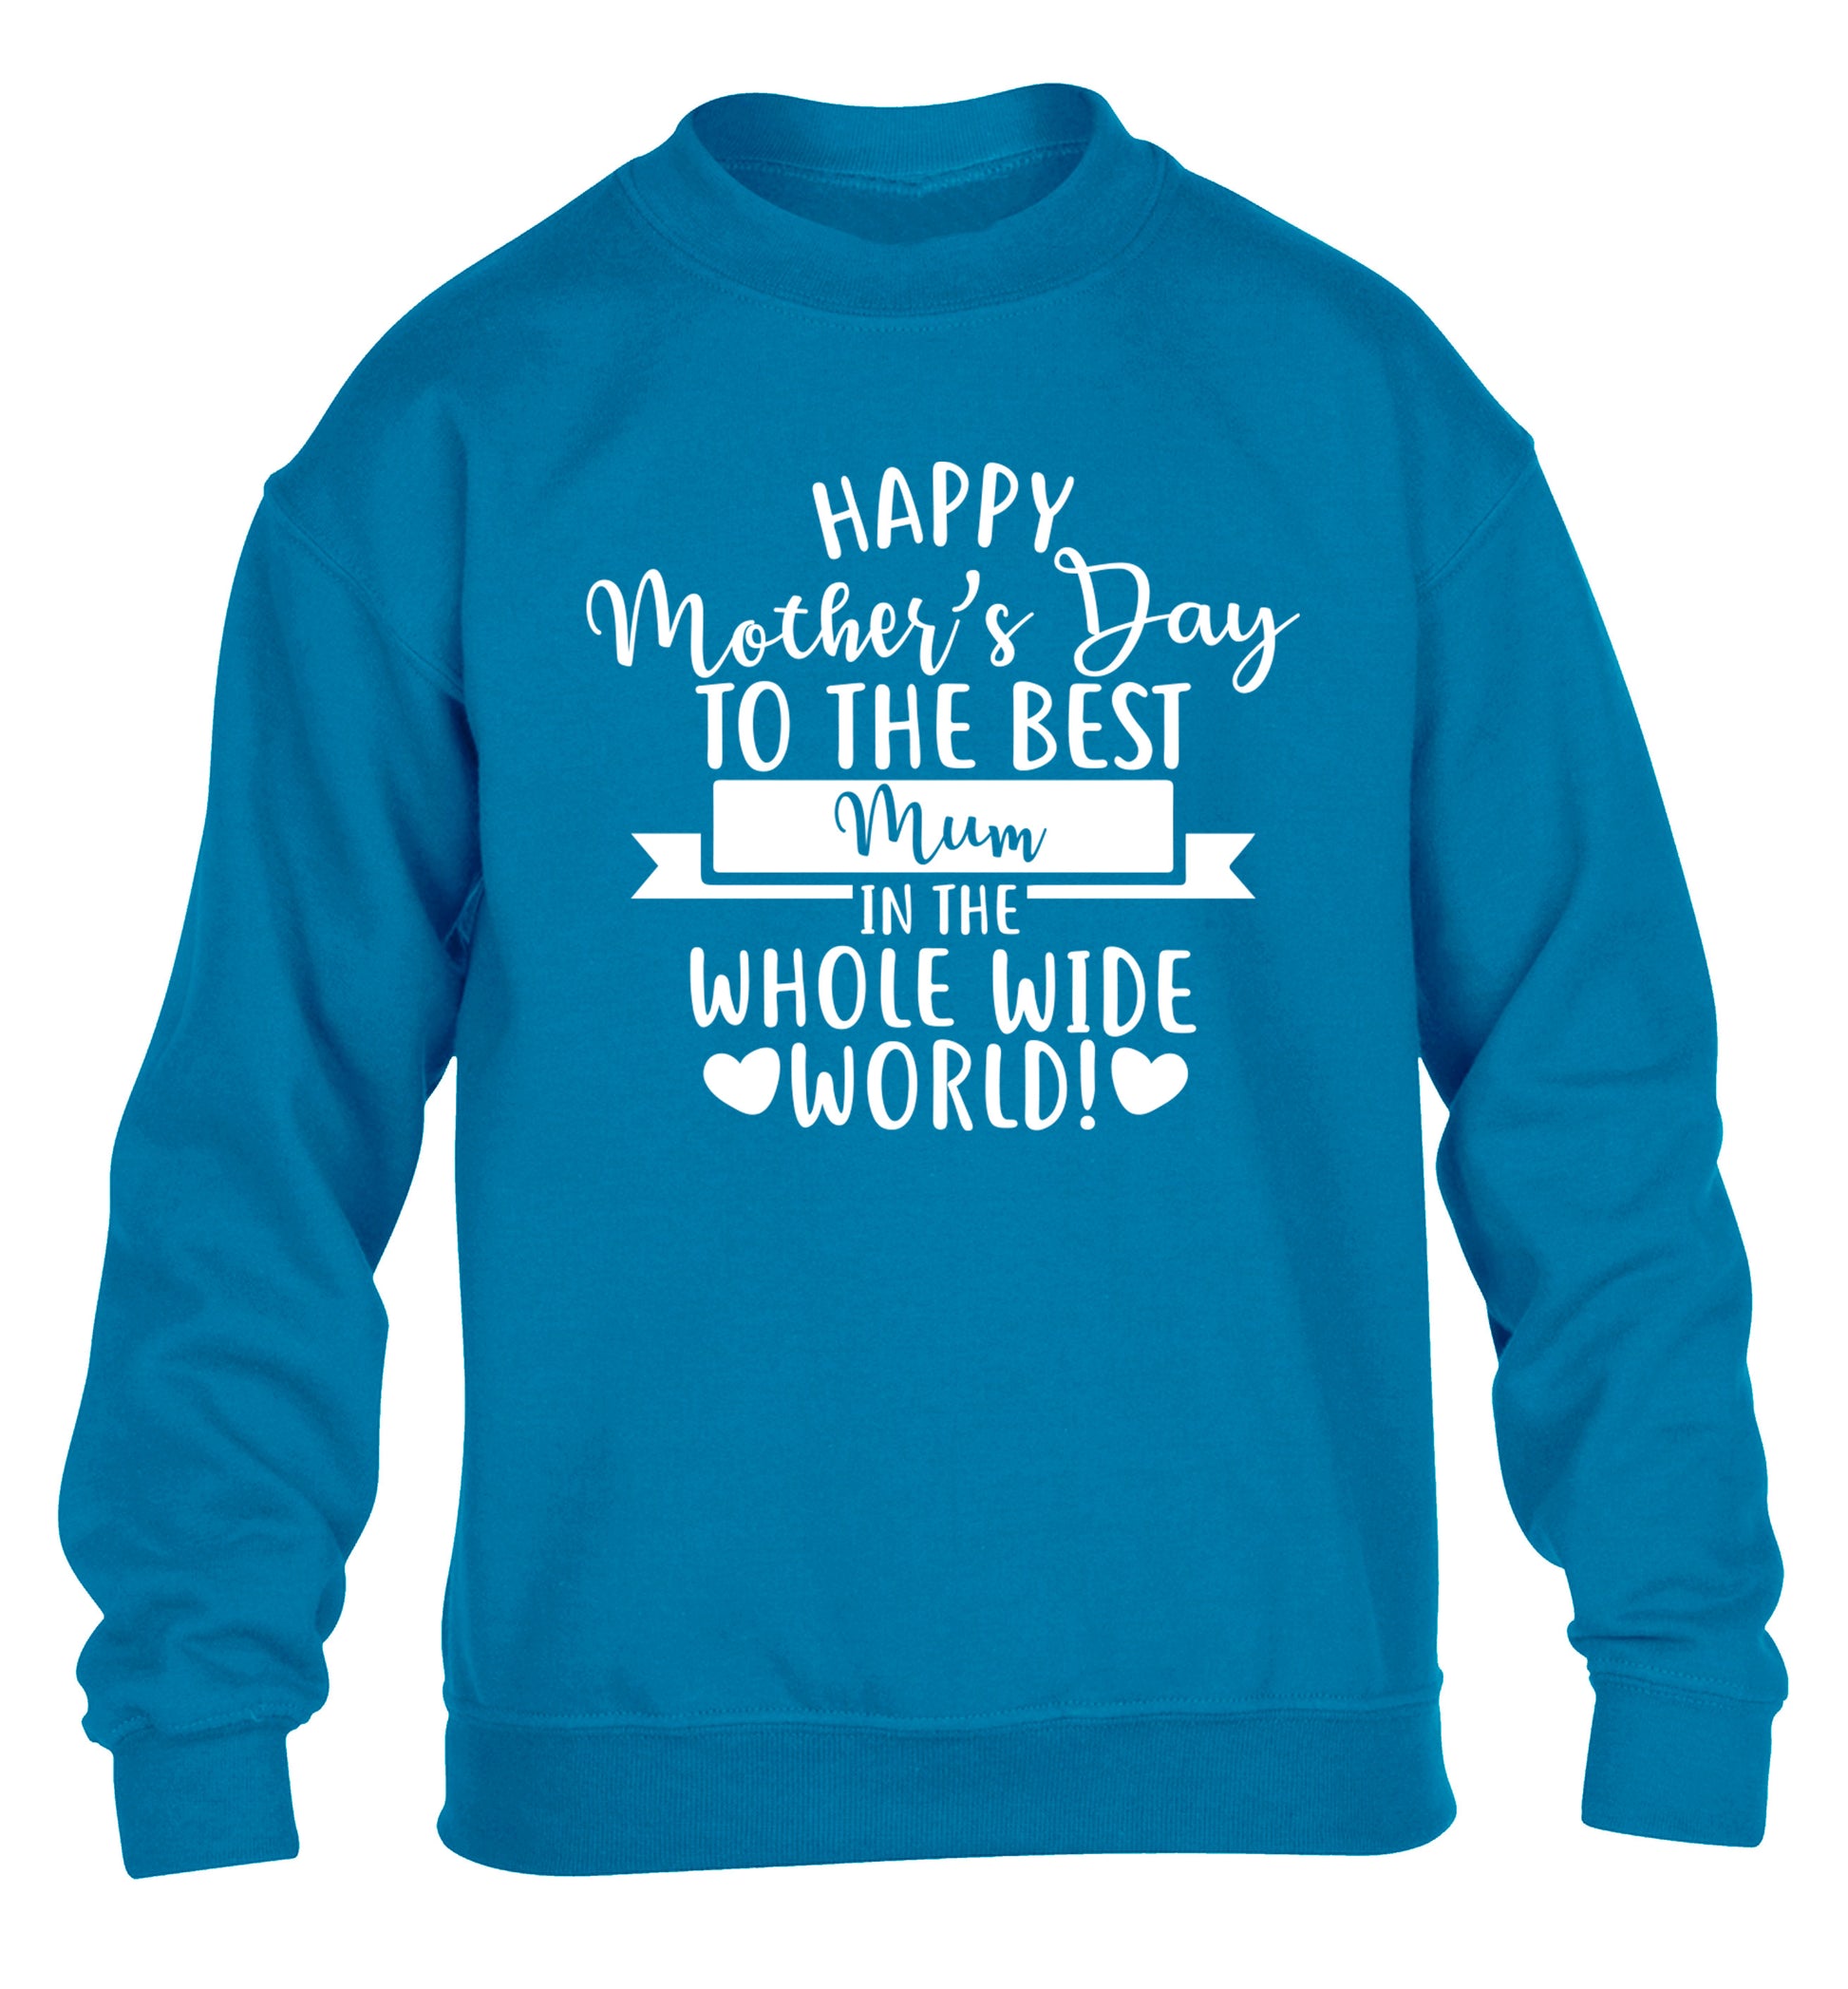 Happy Mother's Day to the best mum in the whole wide world! children's blue sweater 12-13 Years